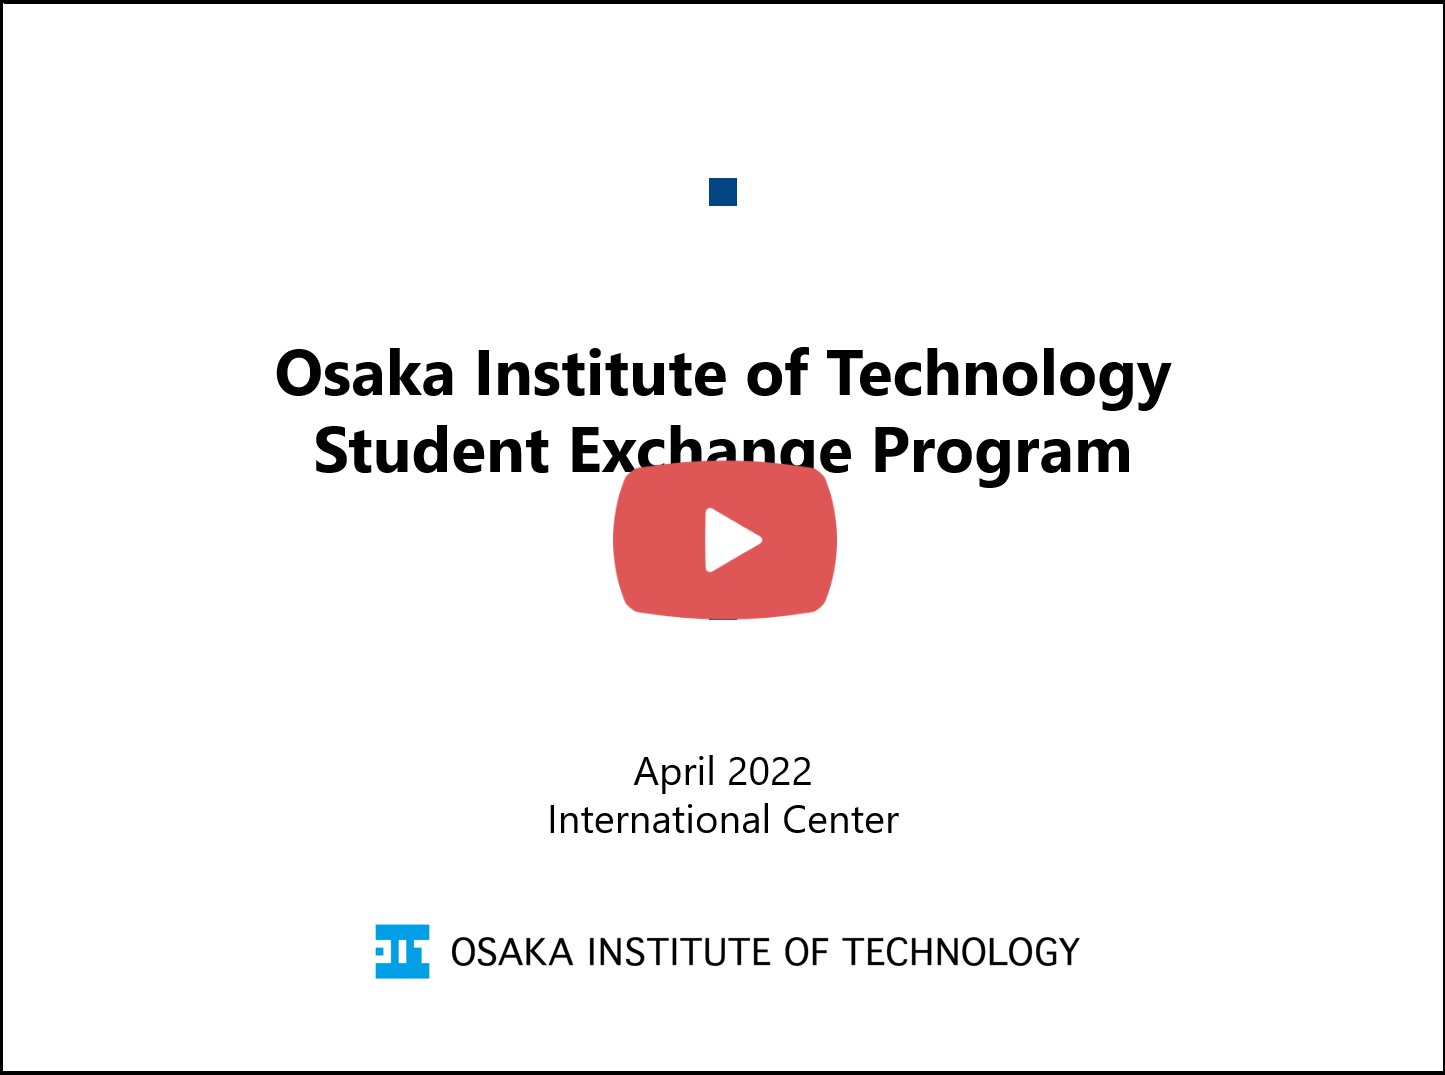 Video of OIT and its Student Exchange Program